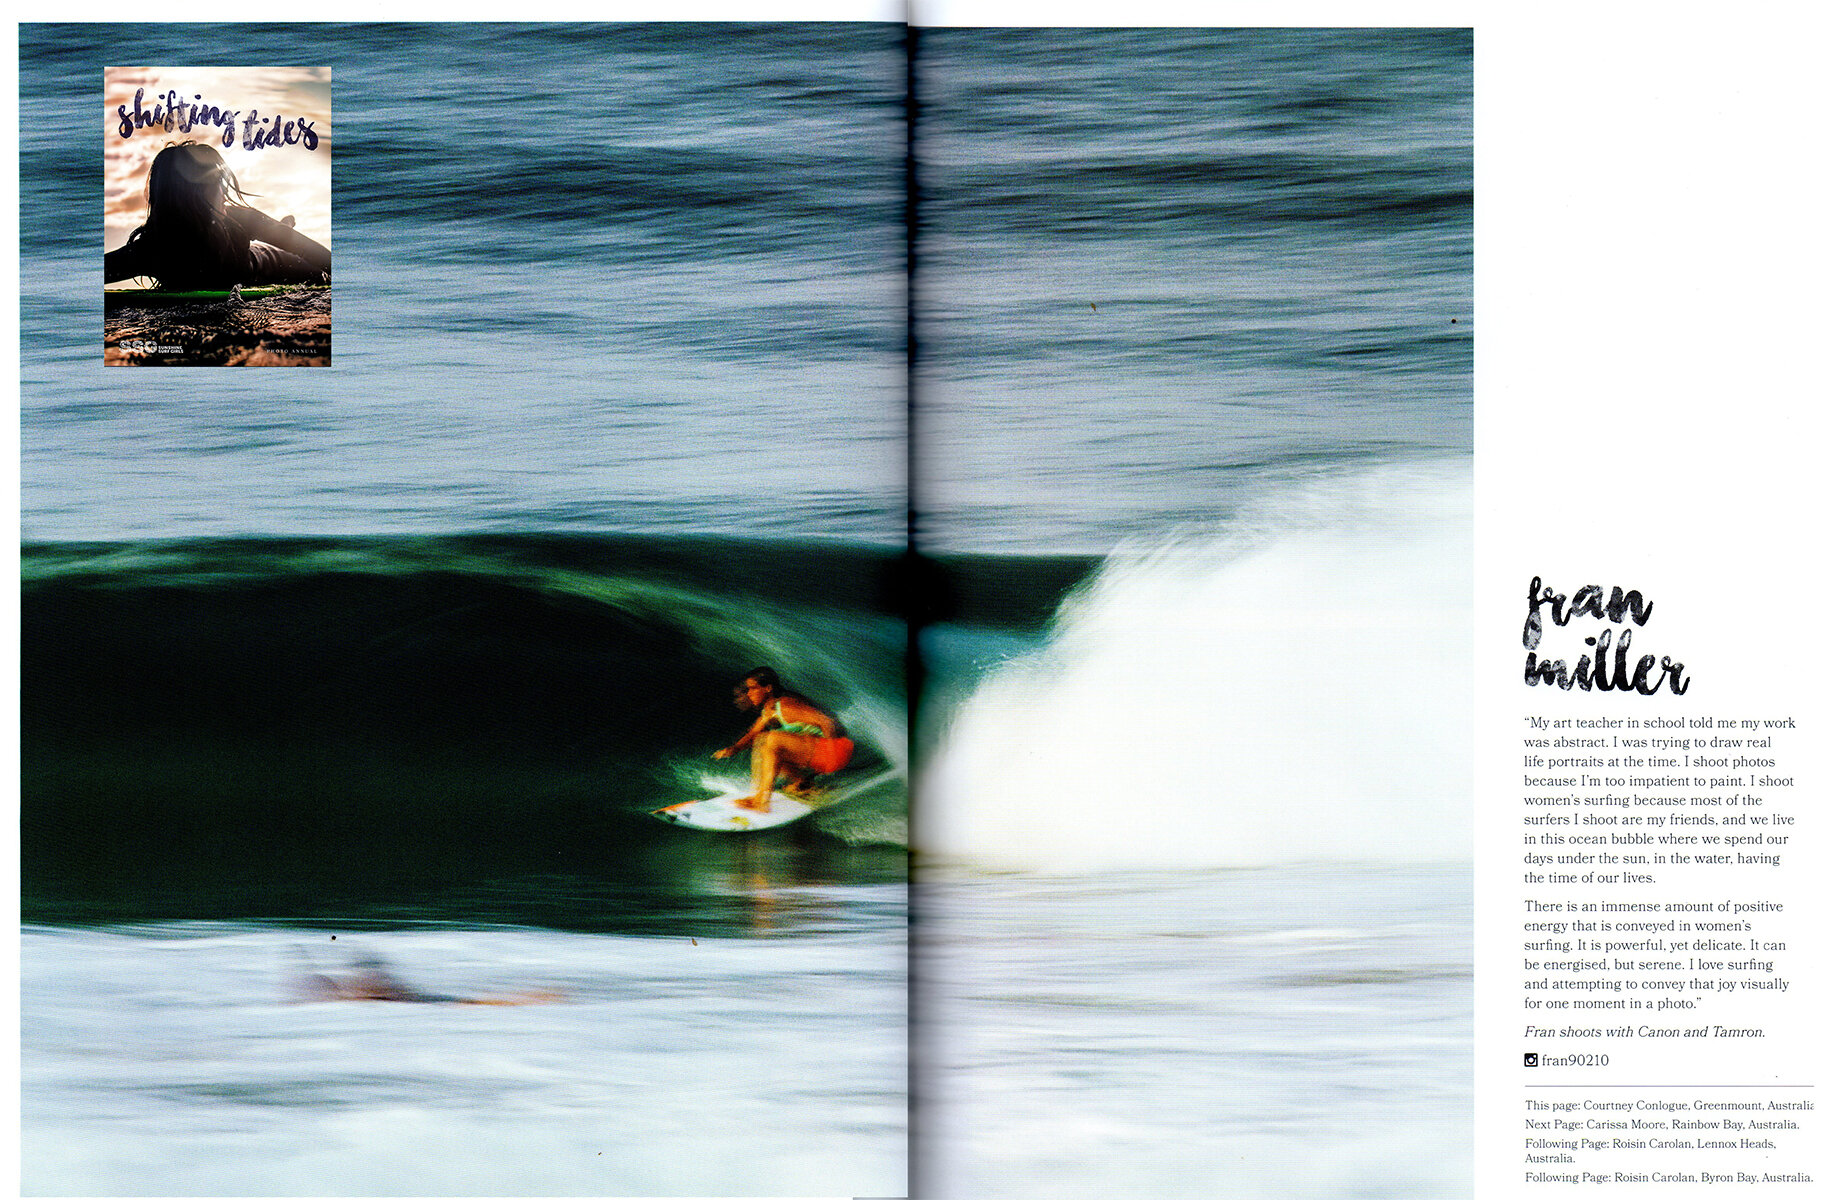 Shifting_Tides_Womens_Surfing_Magazine_Courtney_Conlogue_by_Fran_Miller.jpg